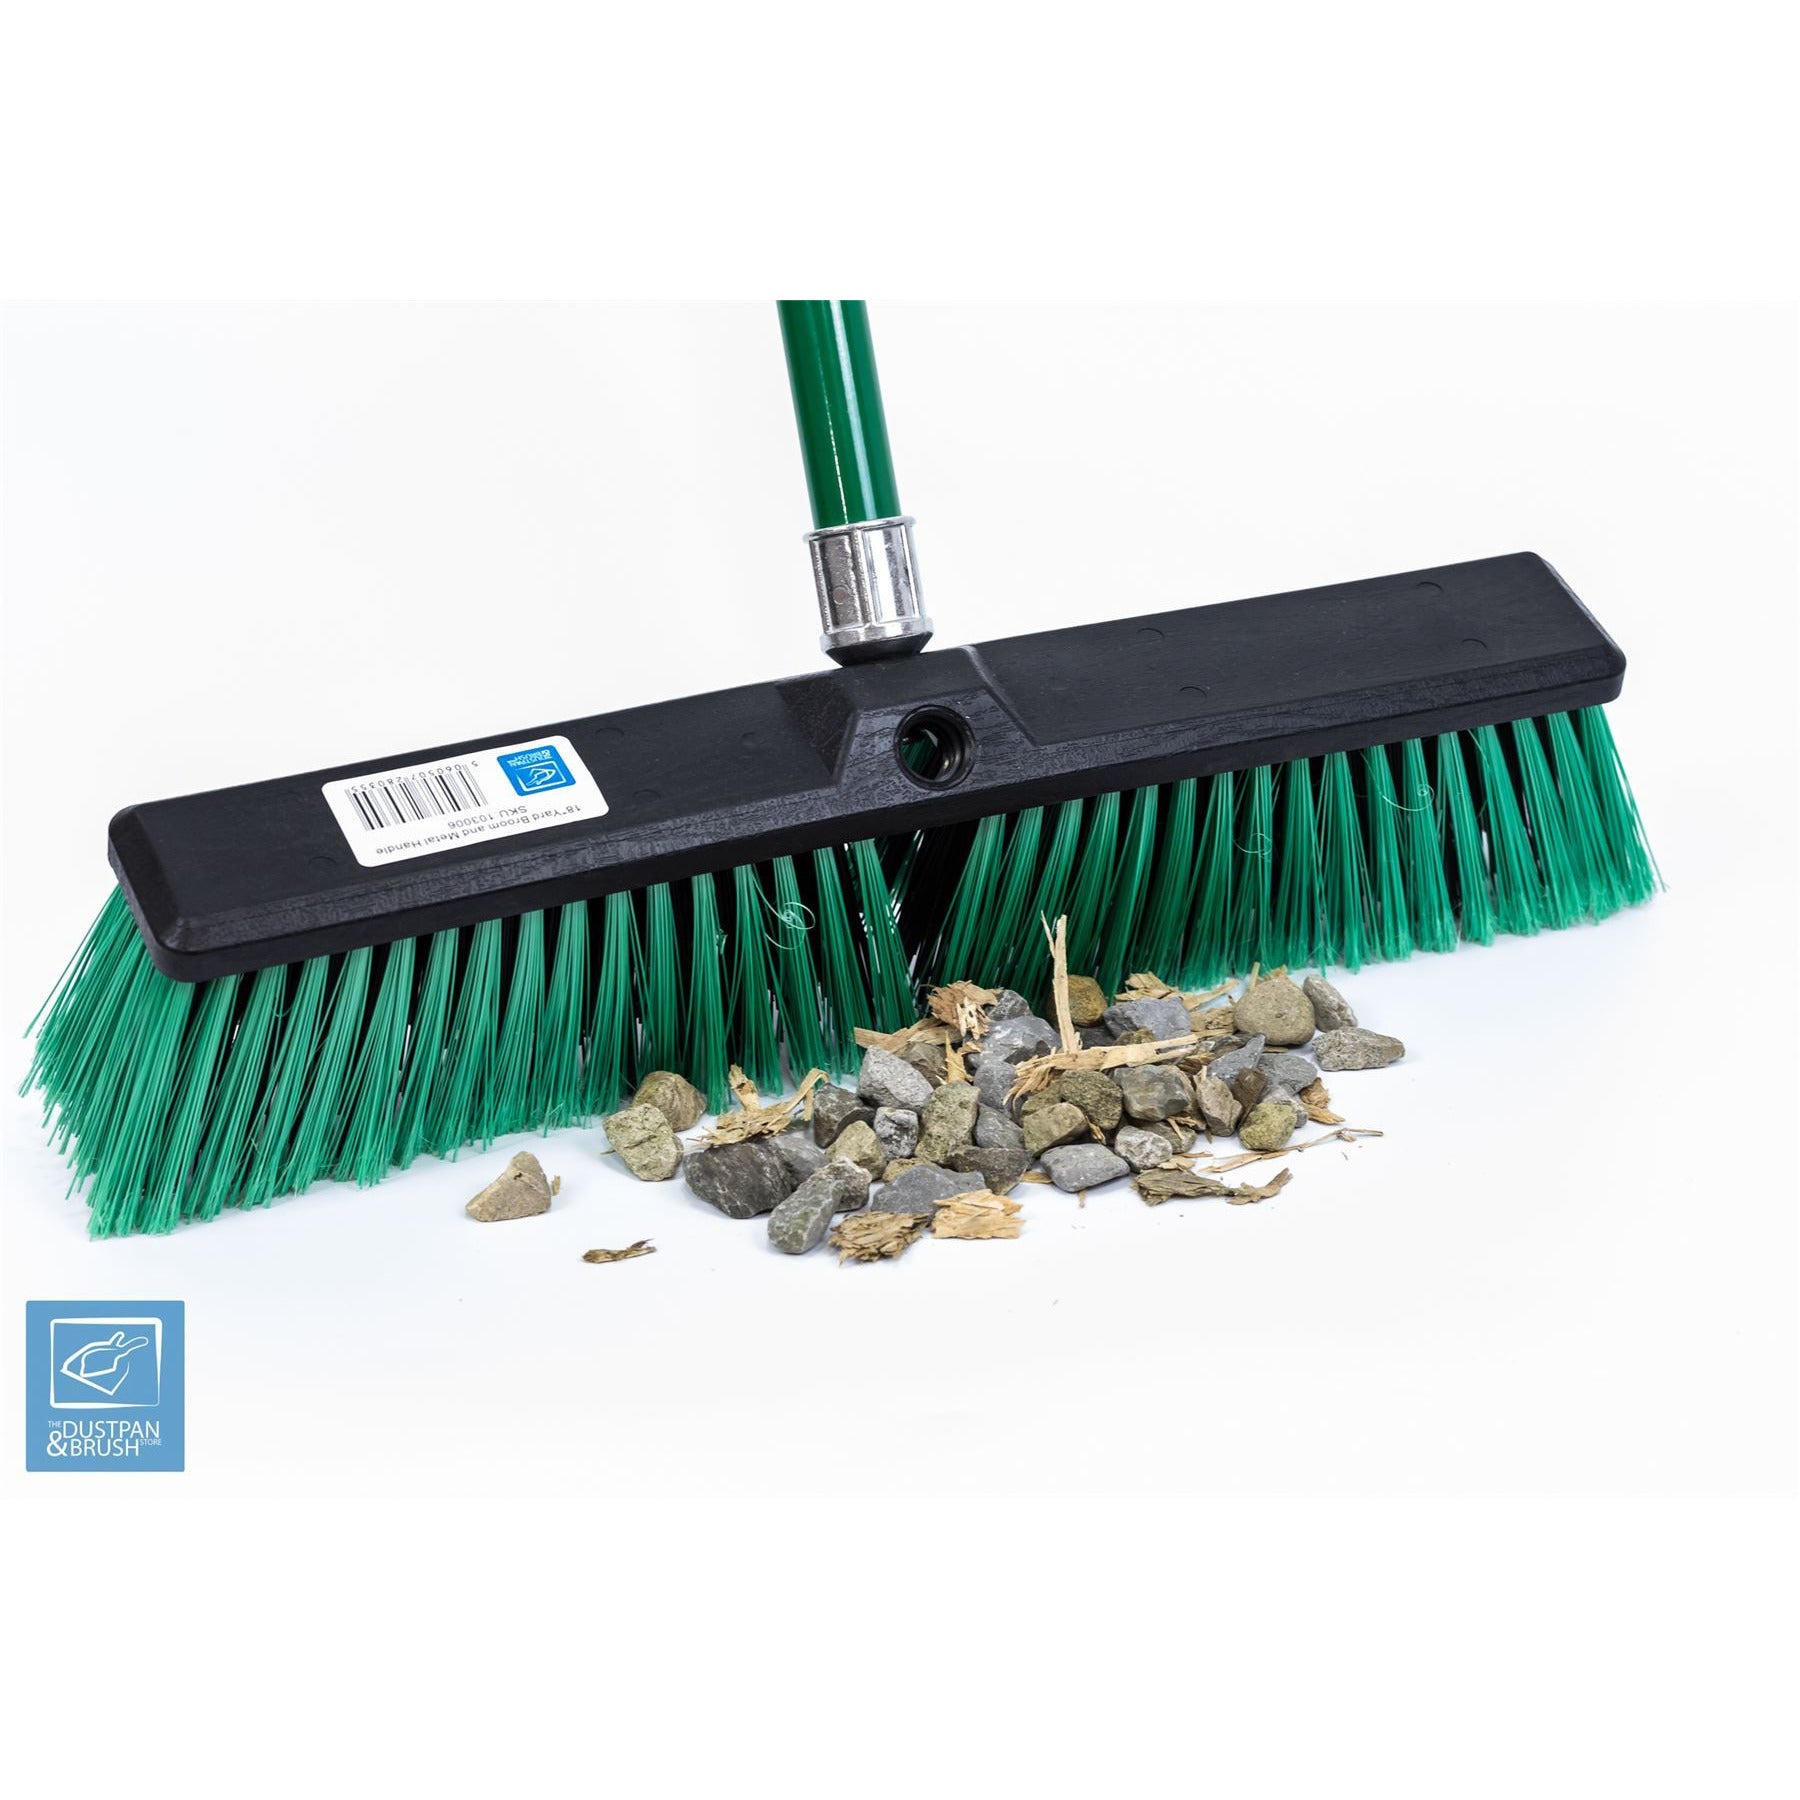 18 Stiff Outdoor Yard Broom with Metal Handle – The Dustpan and Brush Store